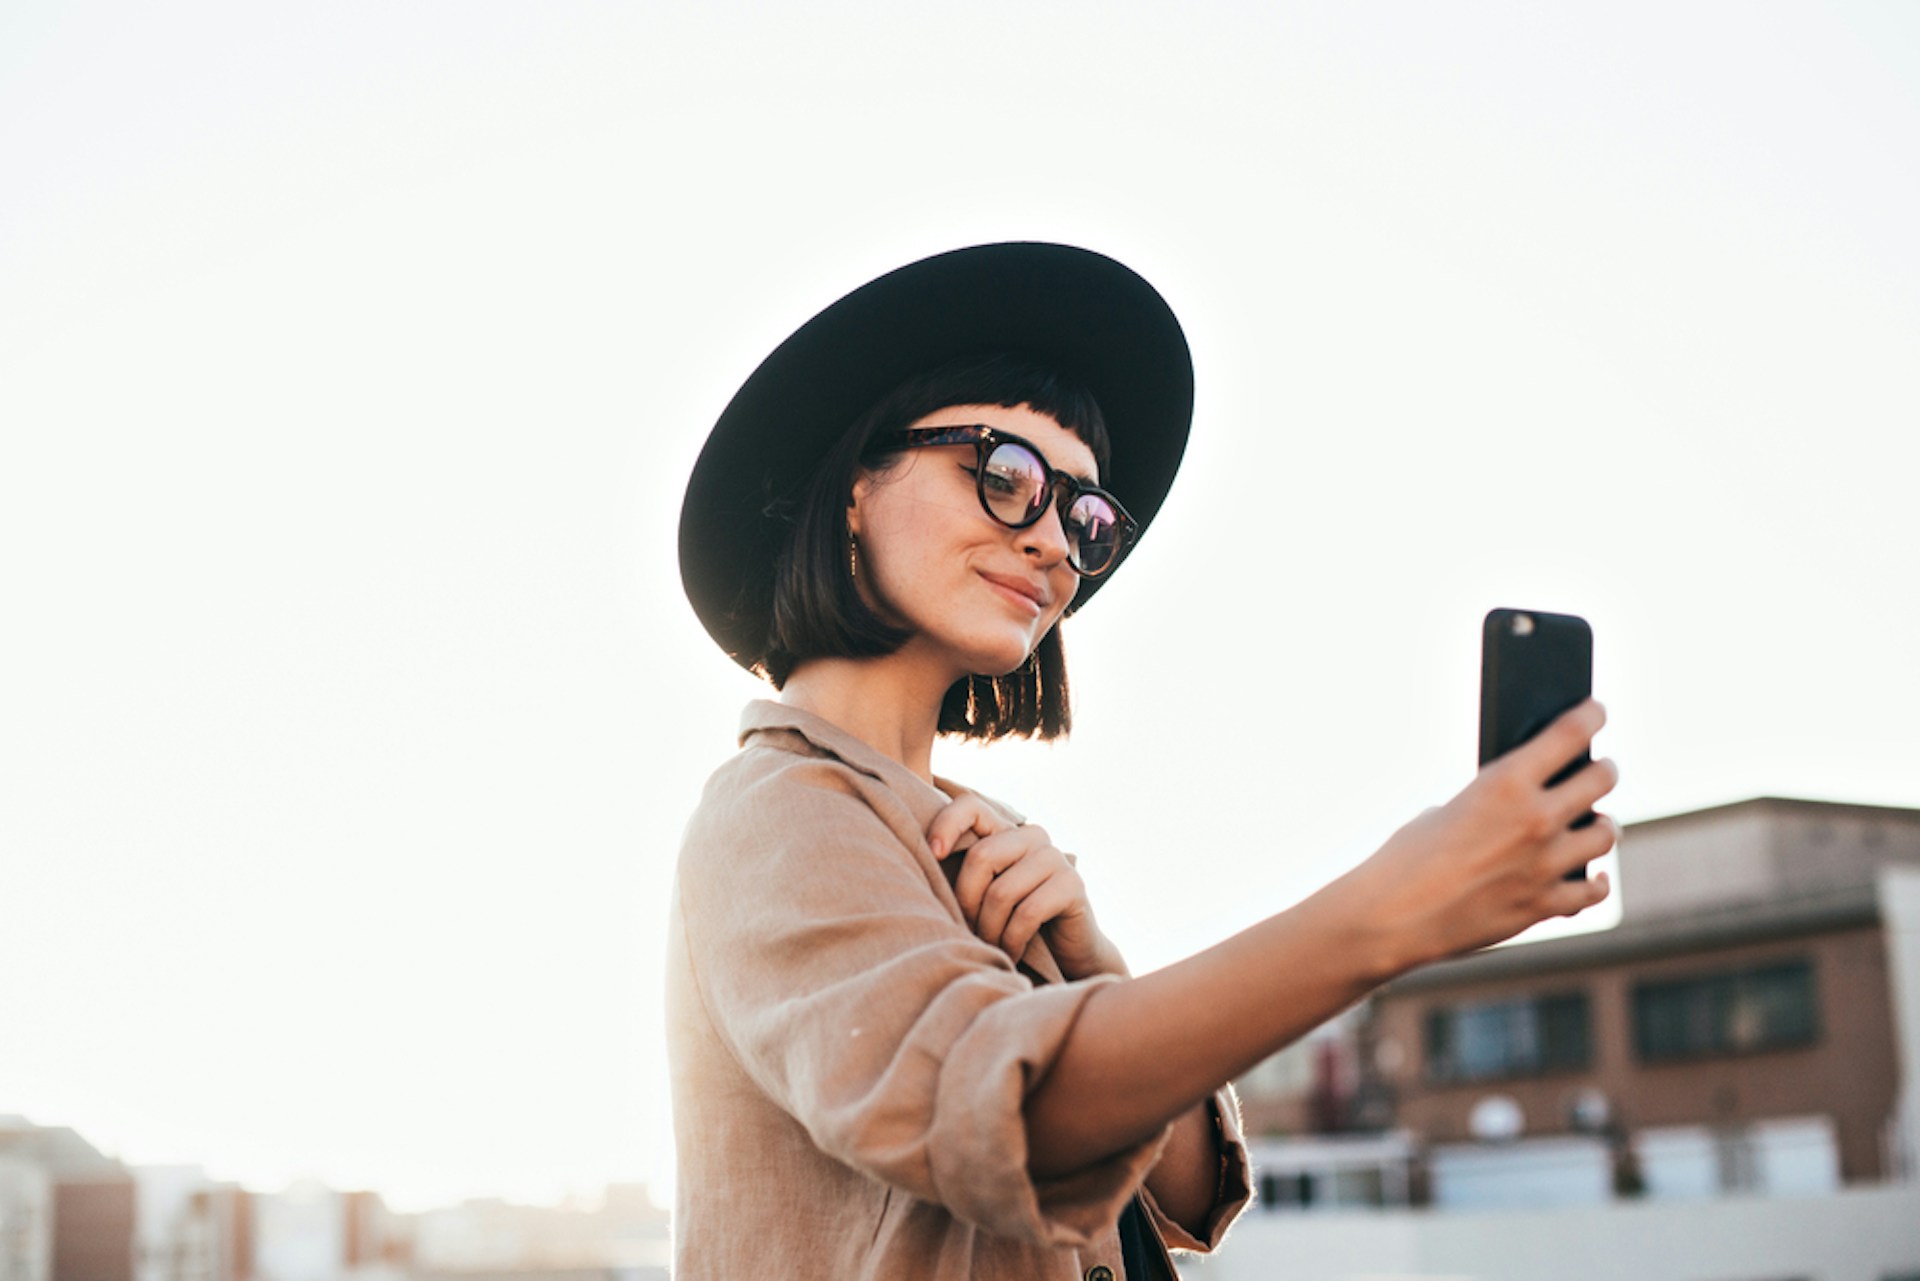 A woman in a wide-brimmed hat taking a selfie on her smartphone